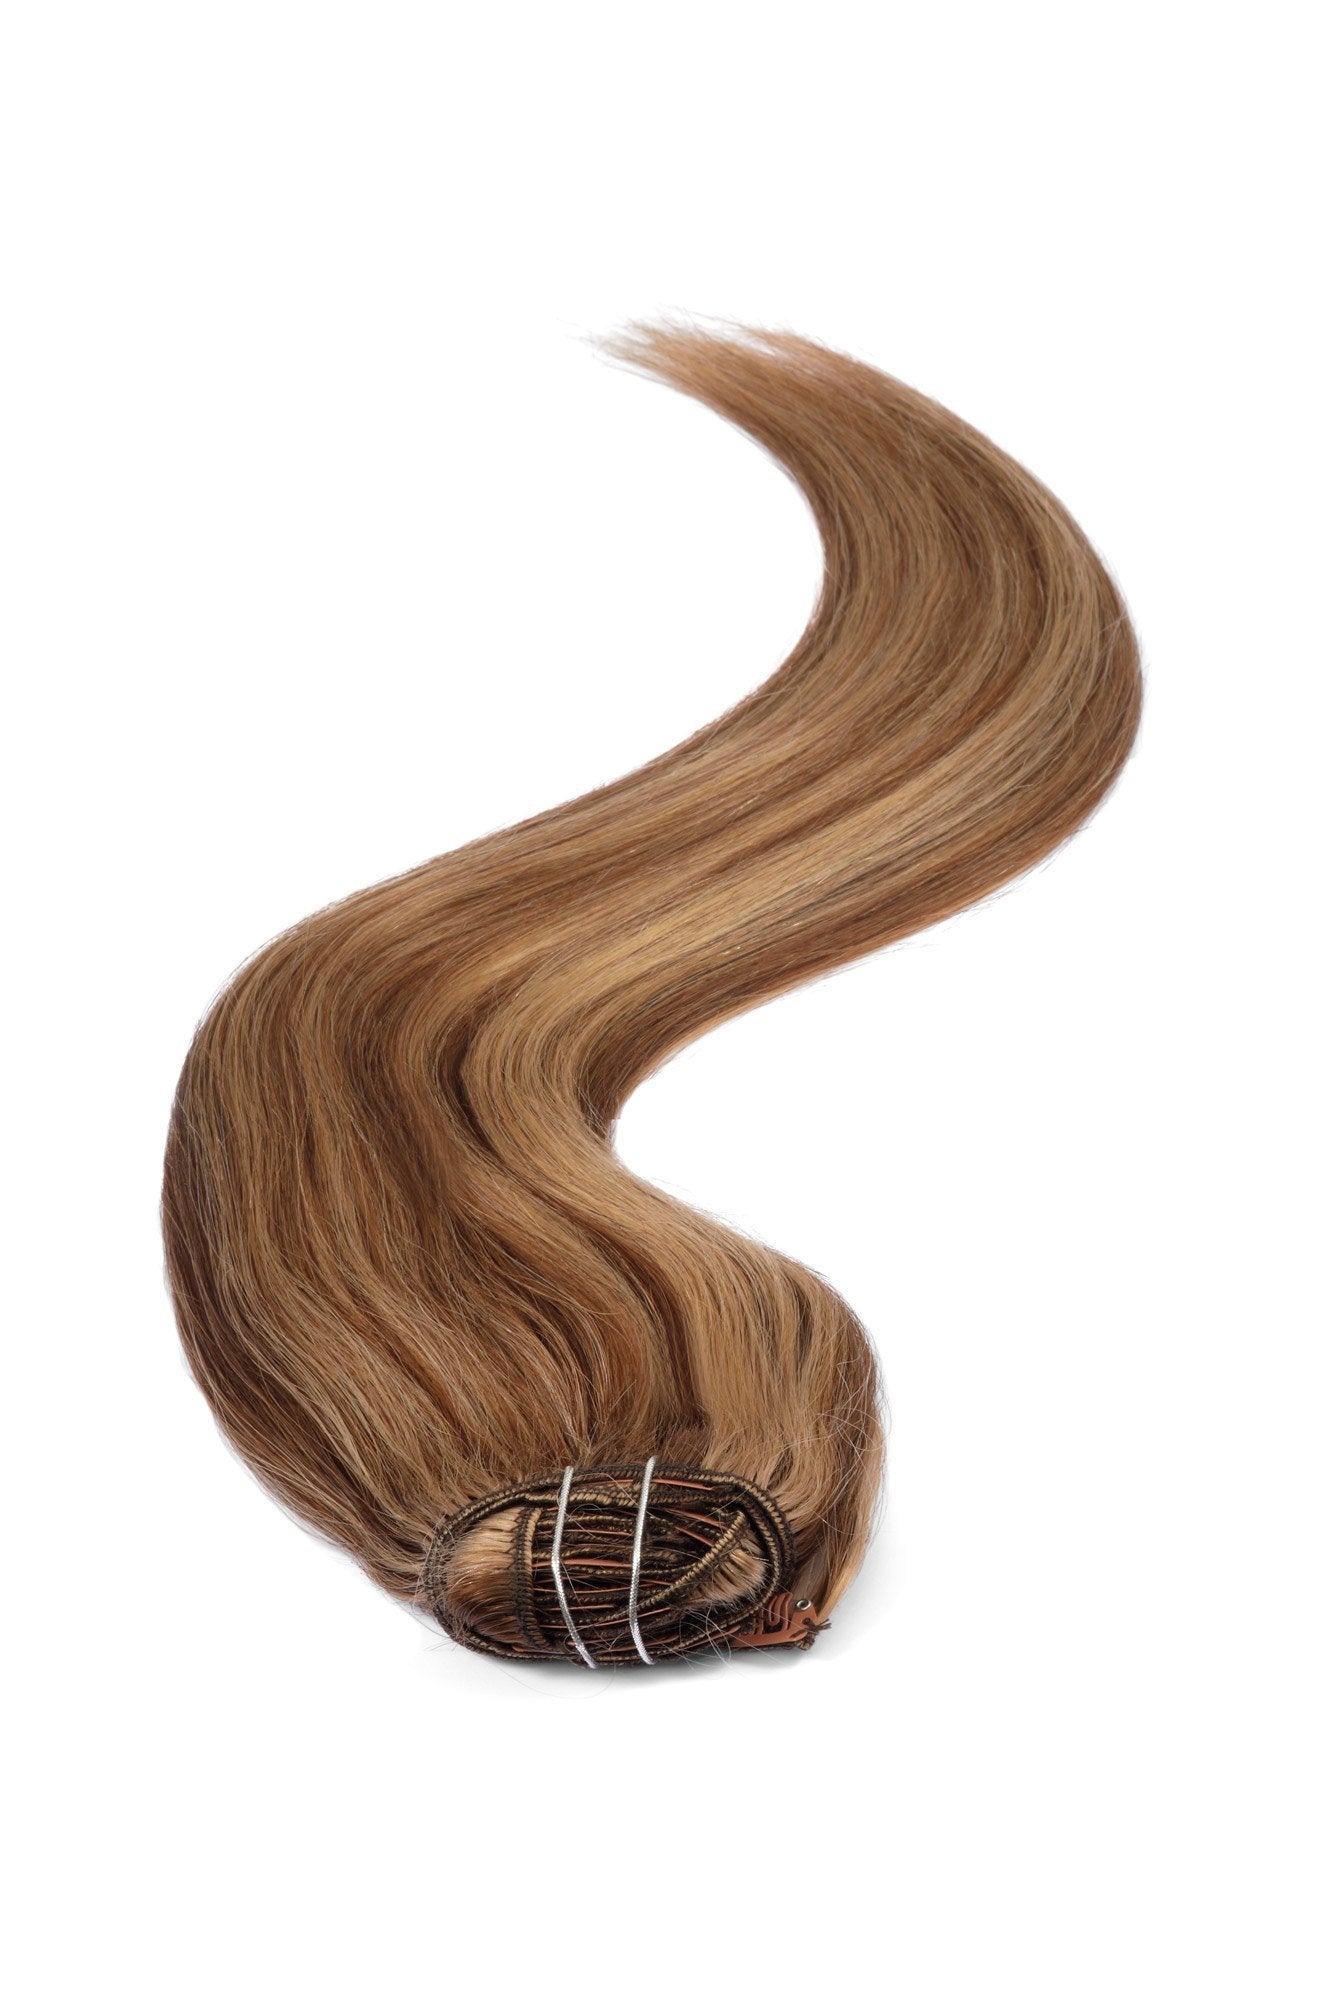 Full Head | Clip in Hair | 18 inch | Brown Blonde Blend (P4/27) - Beauty Hair Products LtdHair Extensions